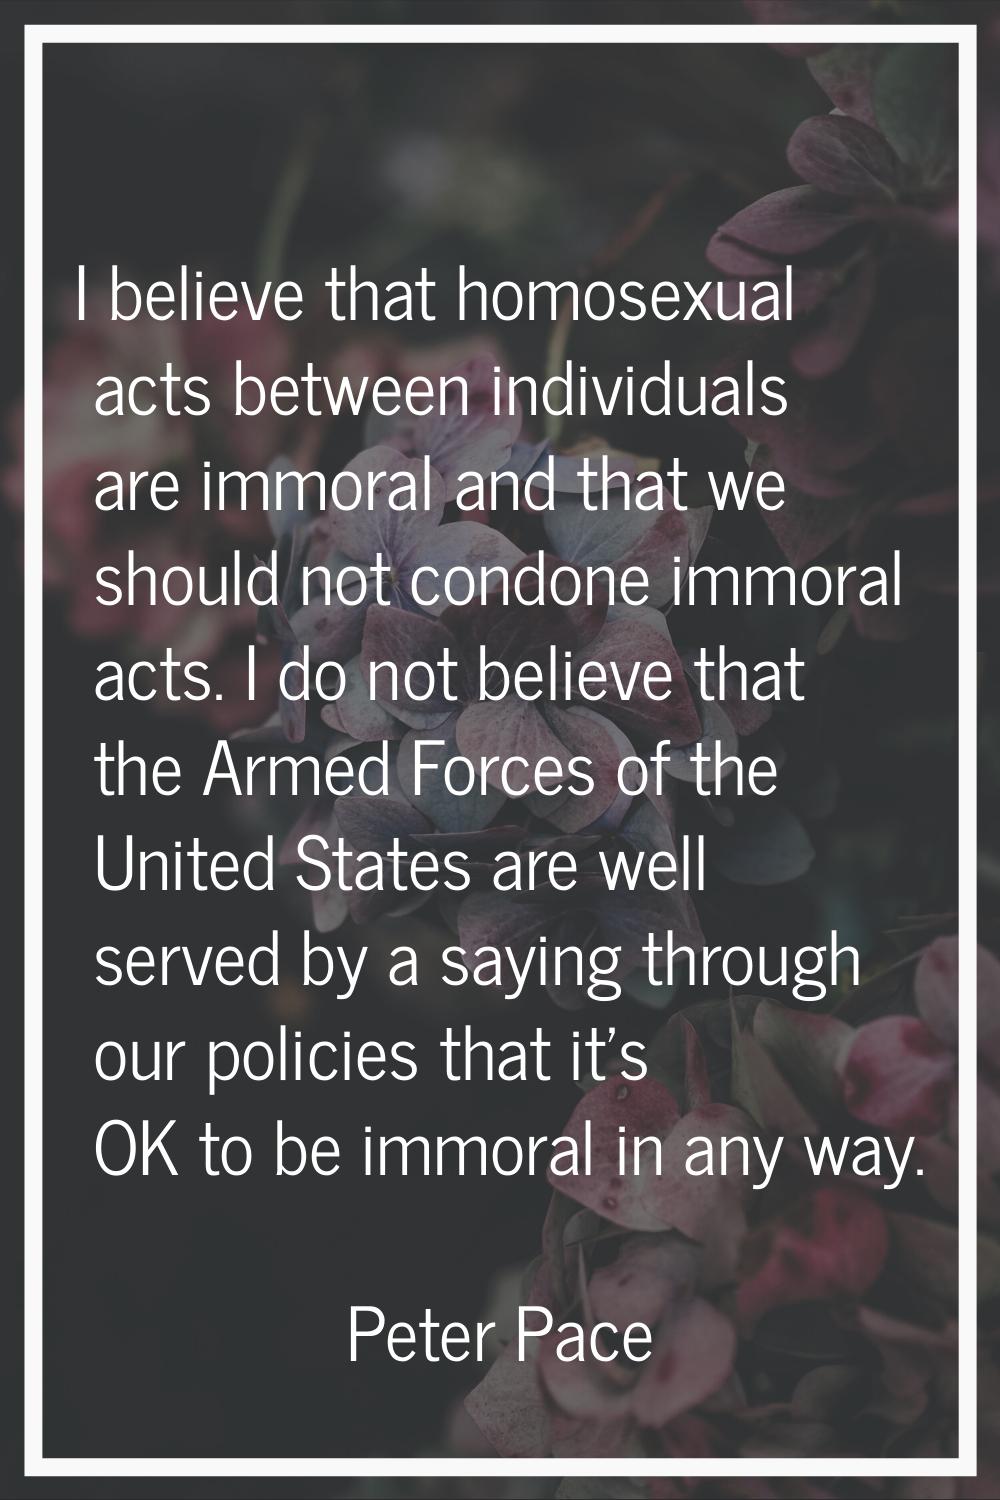 I believe that homosexual acts between individuals are immoral and that we should not condone immor